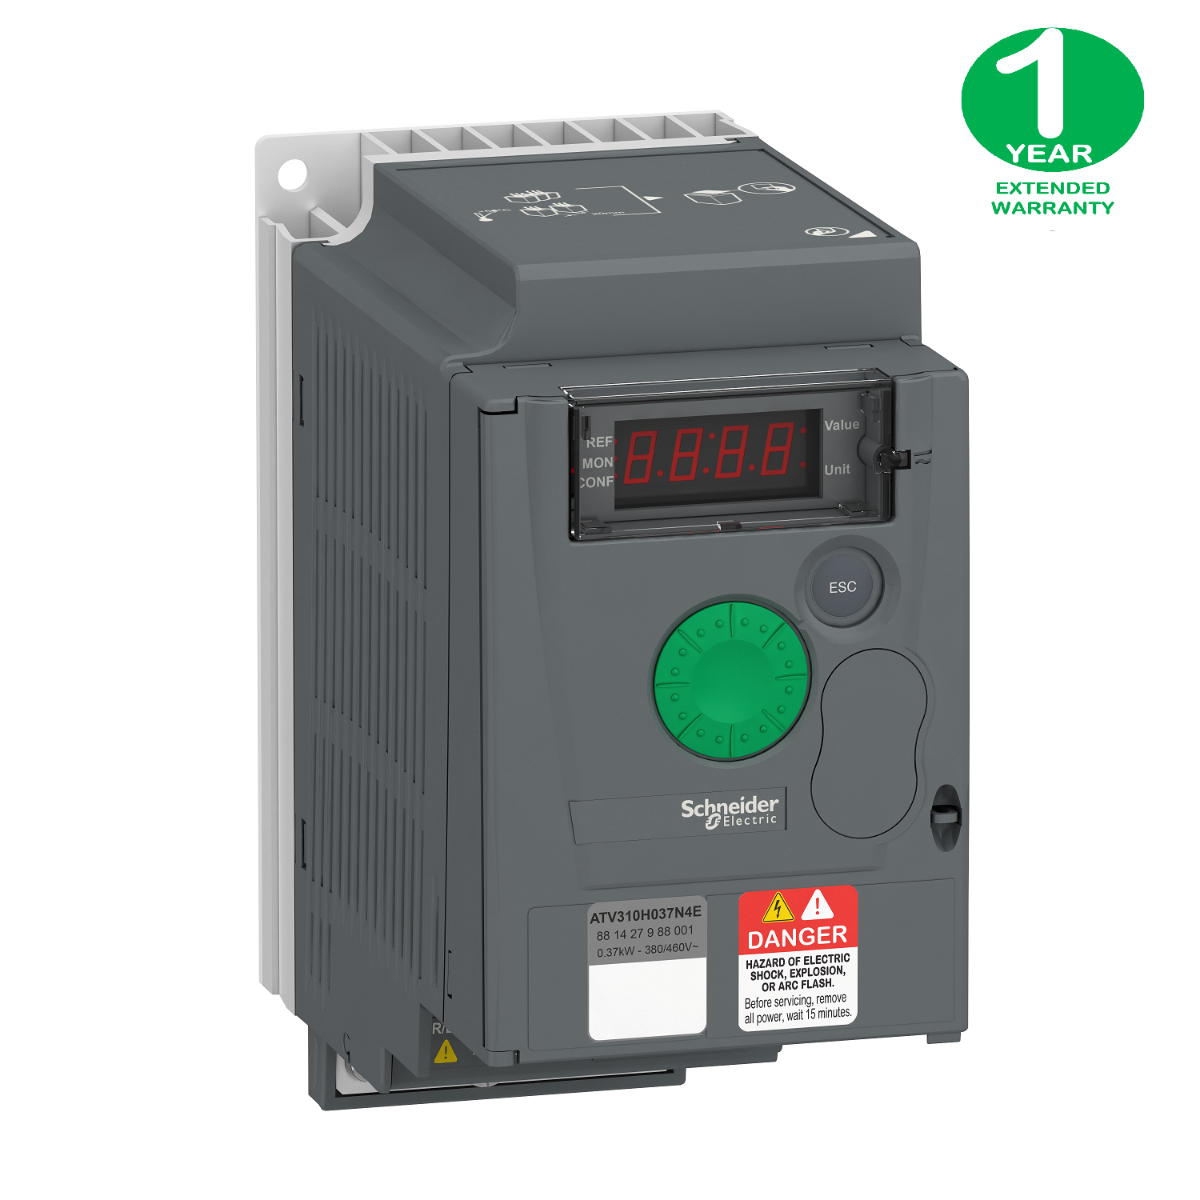 variable speed drive ATV310, 0.37 kW, 0.5 hp, 380...460 V, 3 phase, without filter + Extended Warranty 1 year